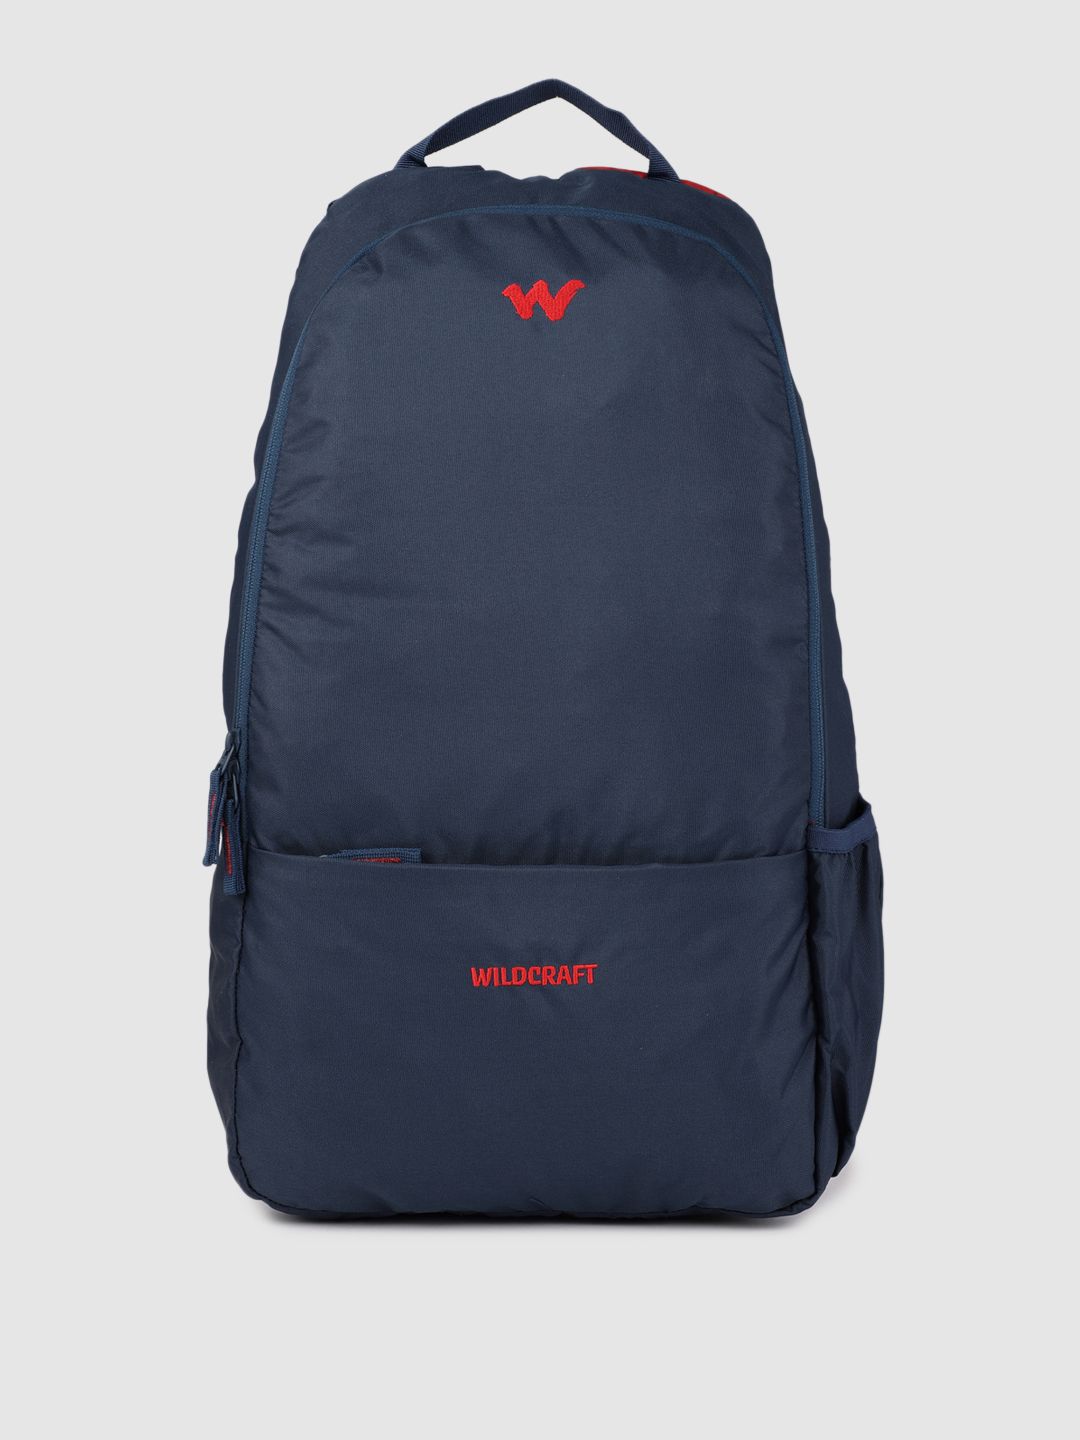 Wildcraft Unisex Navy Blue & Red Solid Backpack Price in India